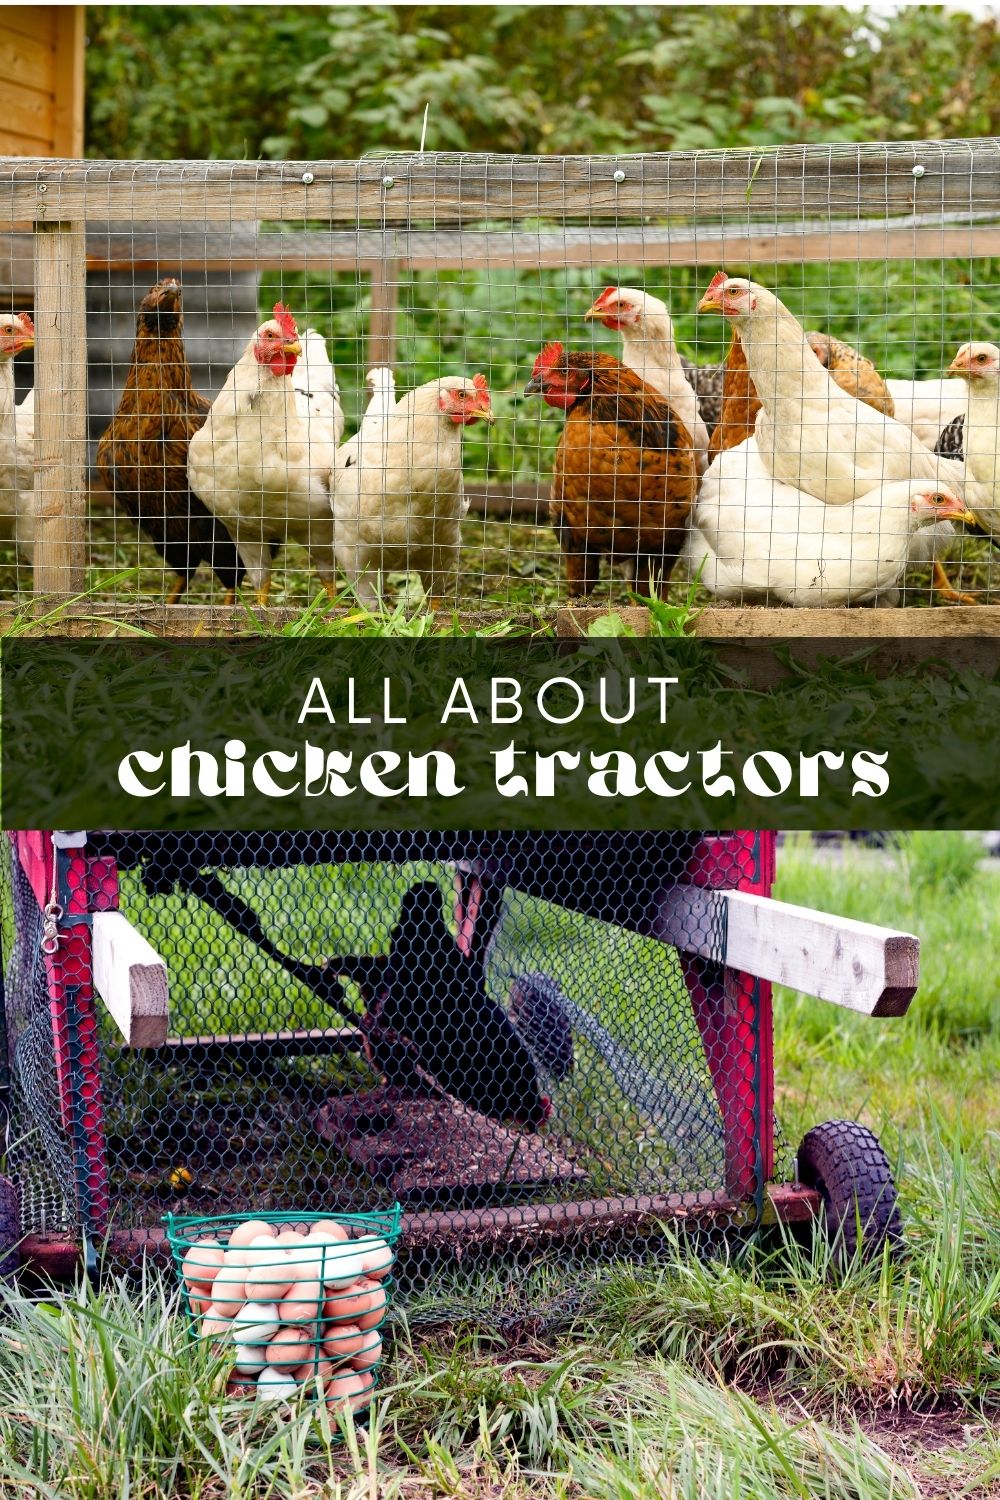 A chicken tractor is a portable chicken coop that can be easily moved around a yard or garden. It is designed to allow chickens to forage for insects and greens while providing them with a safe place to sleep and lay eggs. Chicken tractors can be a great way to have fresh eggs and fertilize your garden at the same time.